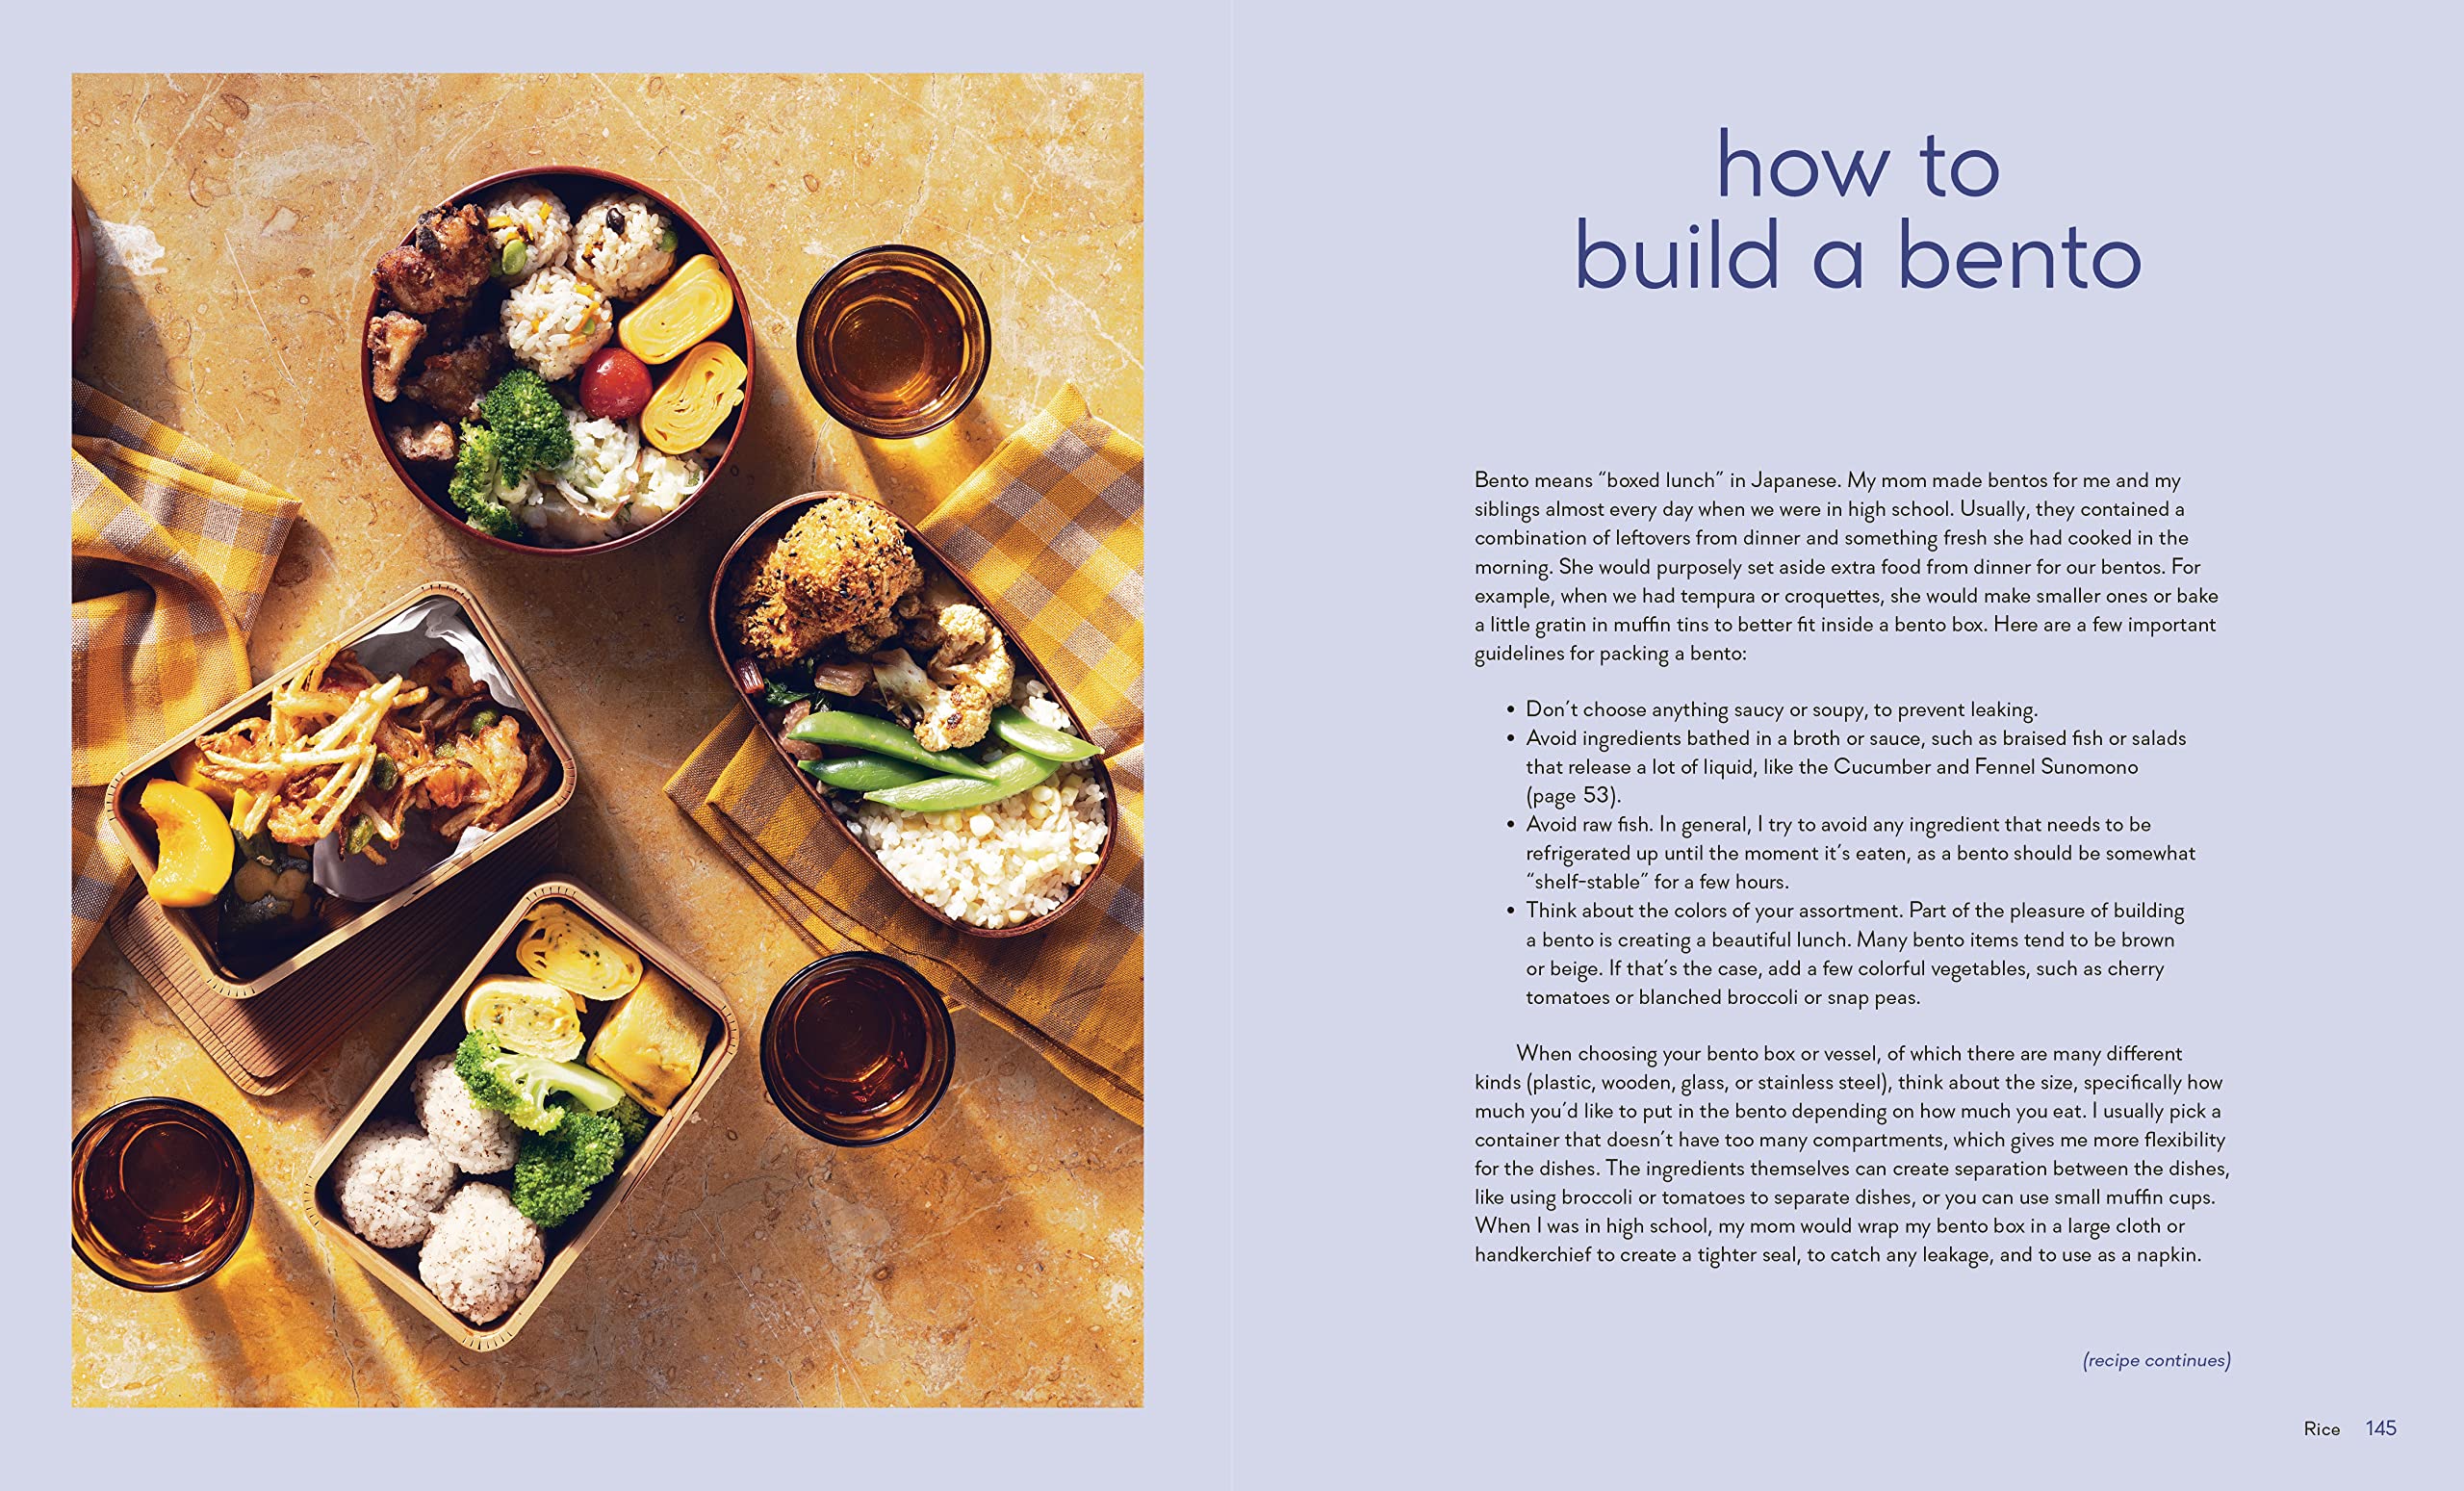 Make It Japanese: Simple Recipes for Everyone